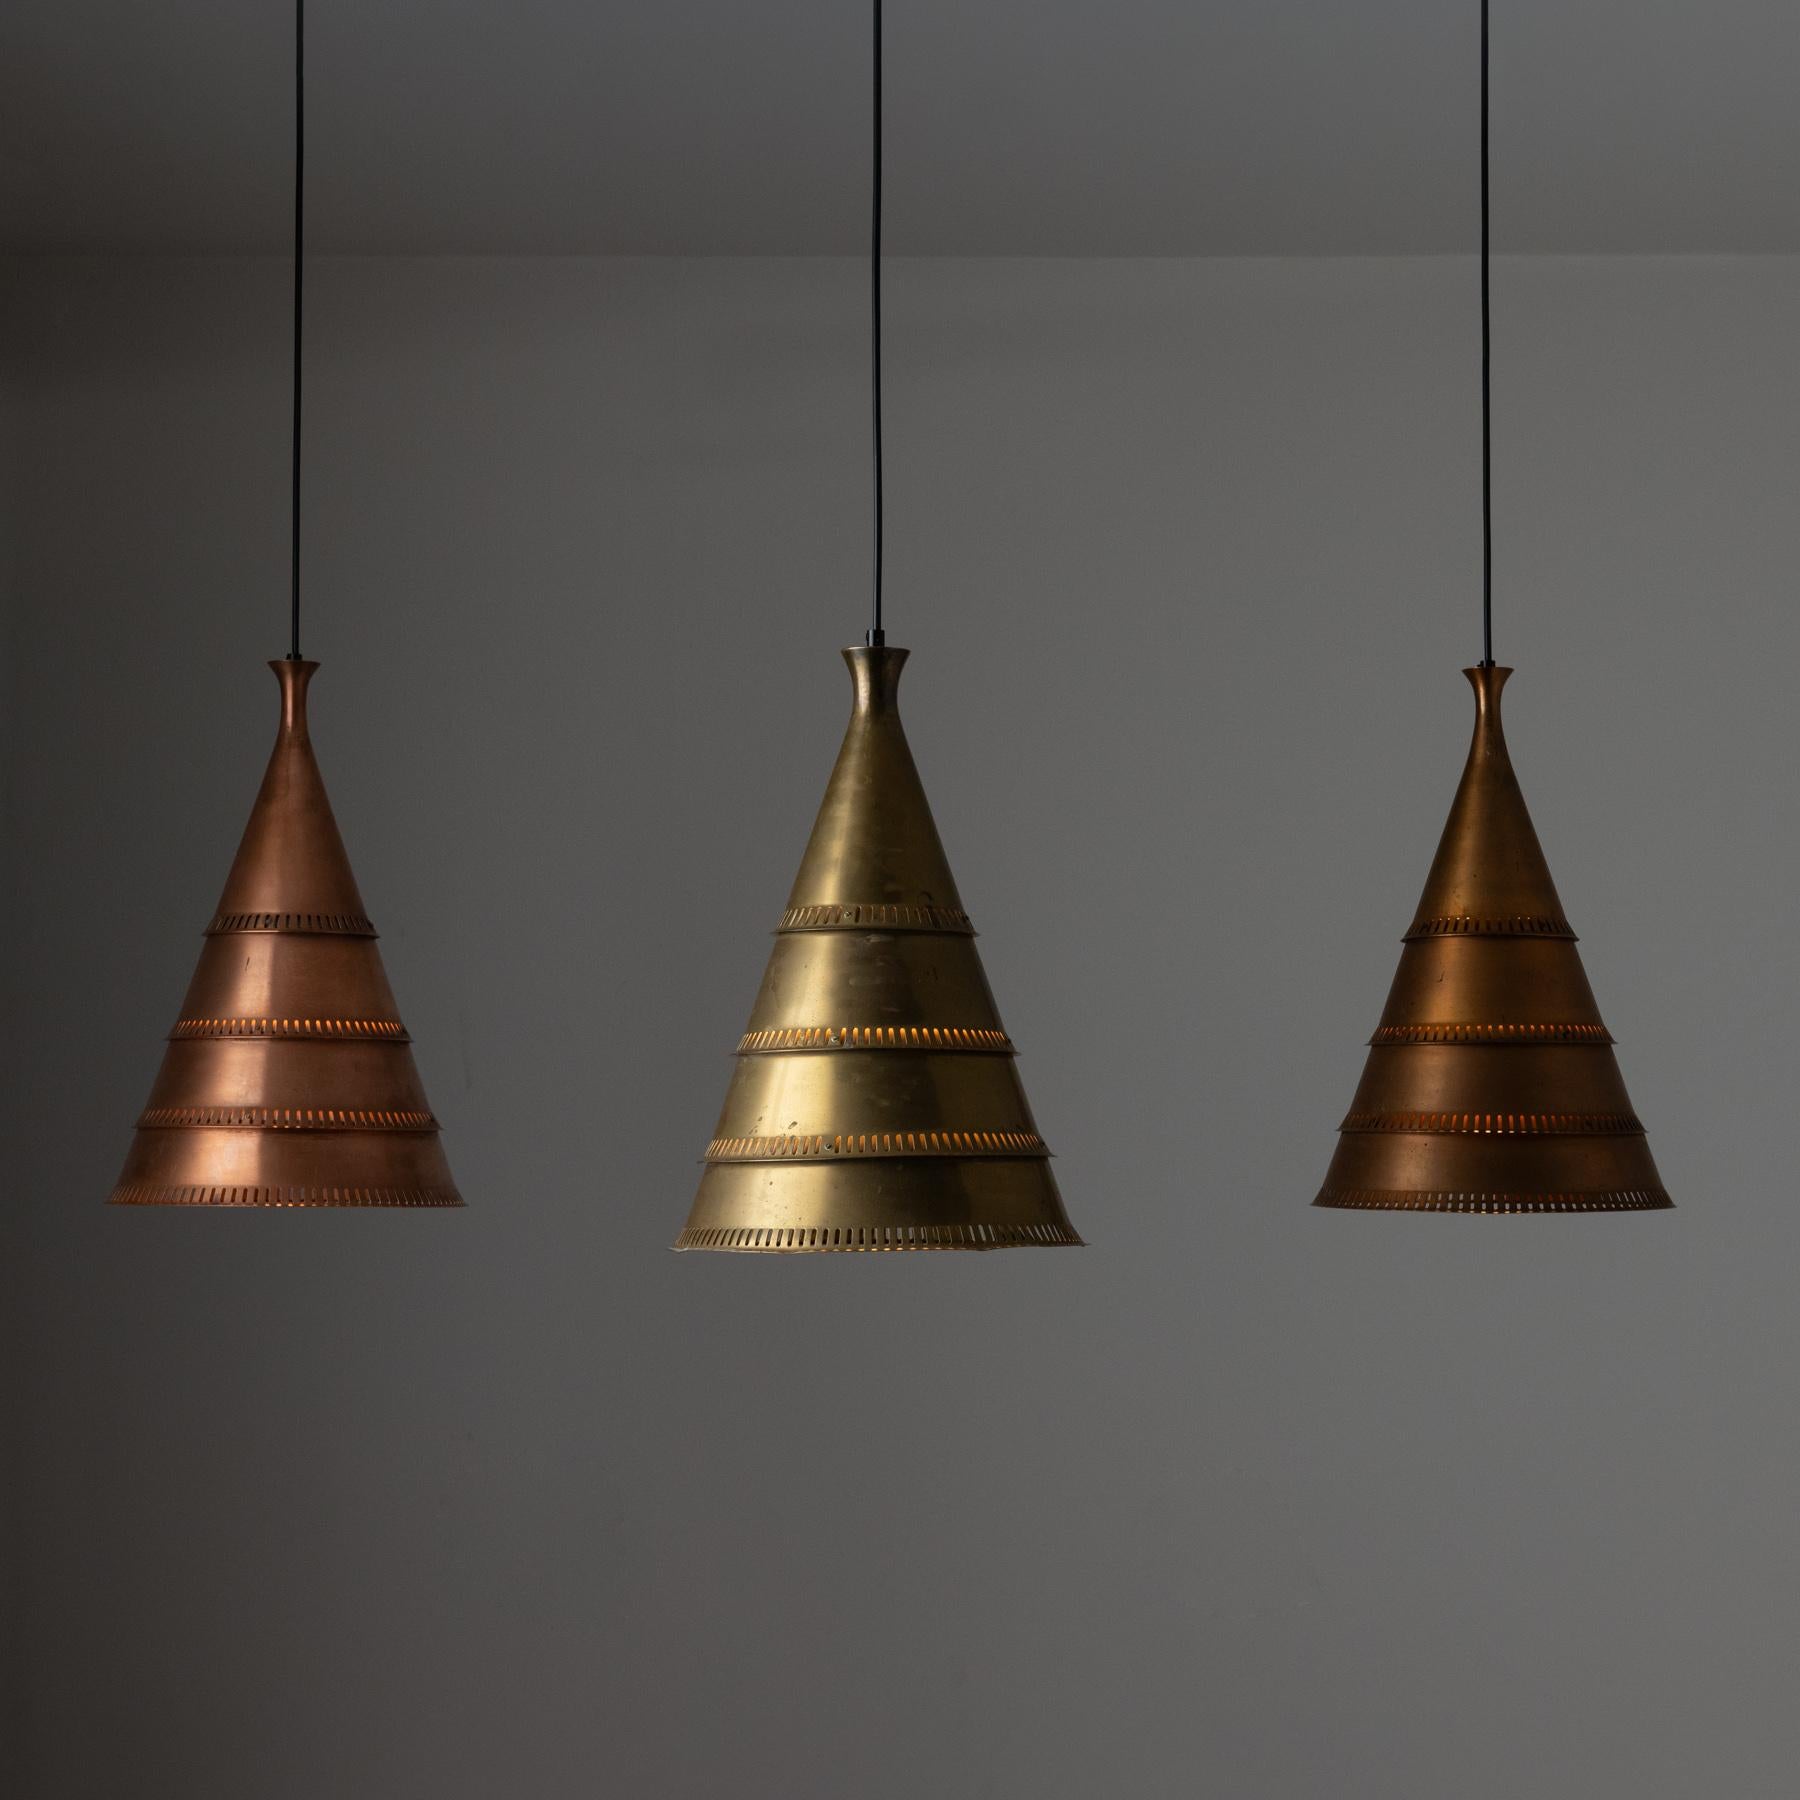 Pendants by Lyfa. Manufactured in Denmark, circa 1960s. These conical shades are photographed as a trio. Each shade is slightly different, one being aged brass, and the other two aged copper, from different time points. Please ask rewire if you have